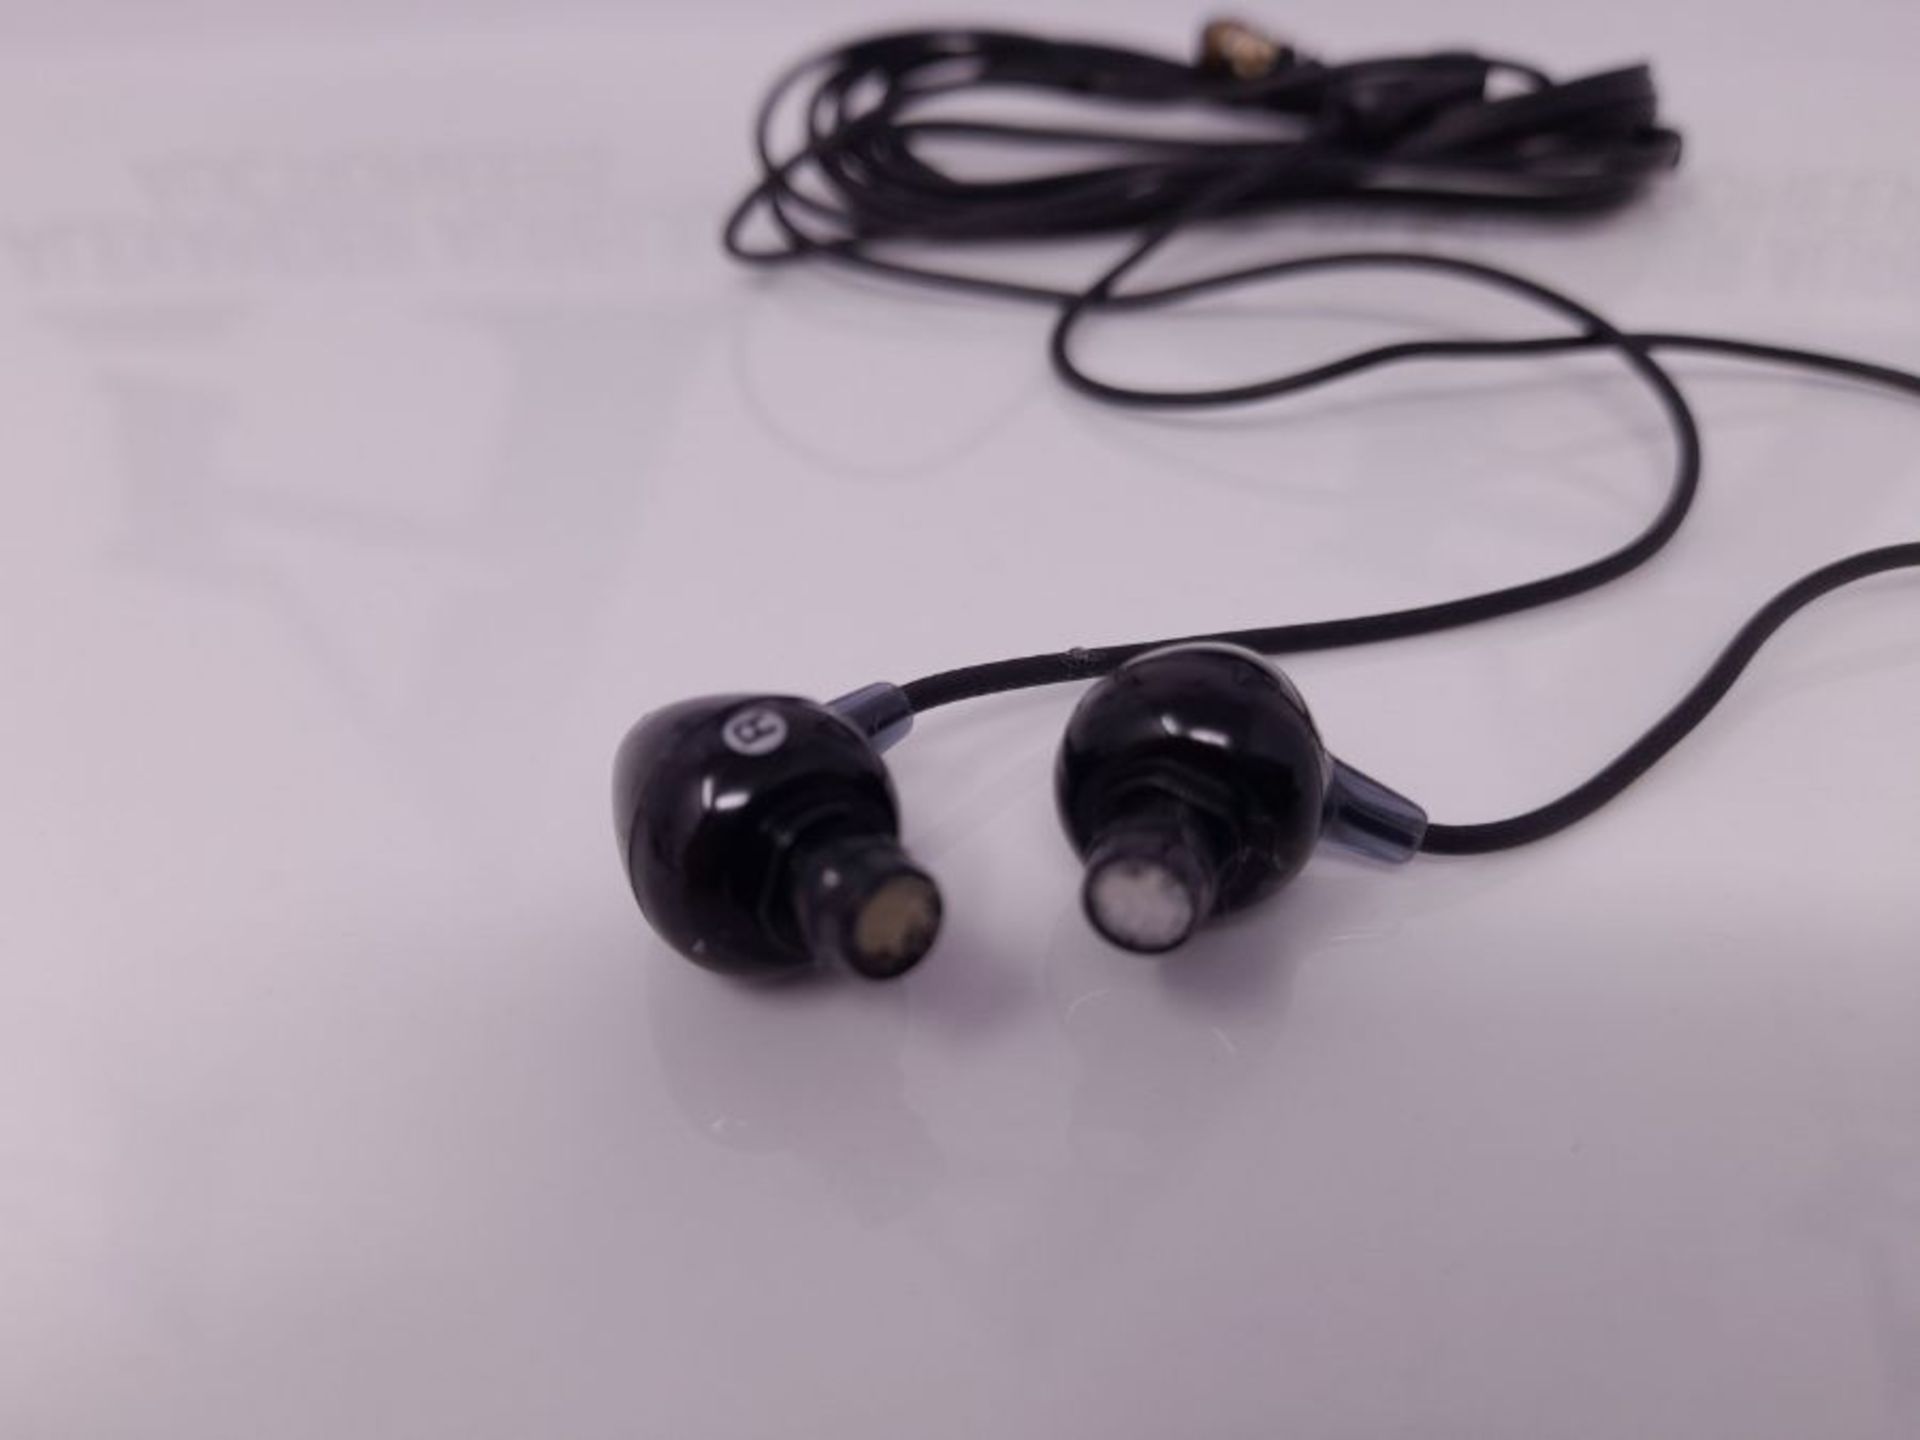 Sony MDR-EX15AP Earphones with Smartphone Mic and Control - Black - Image 3 of 3